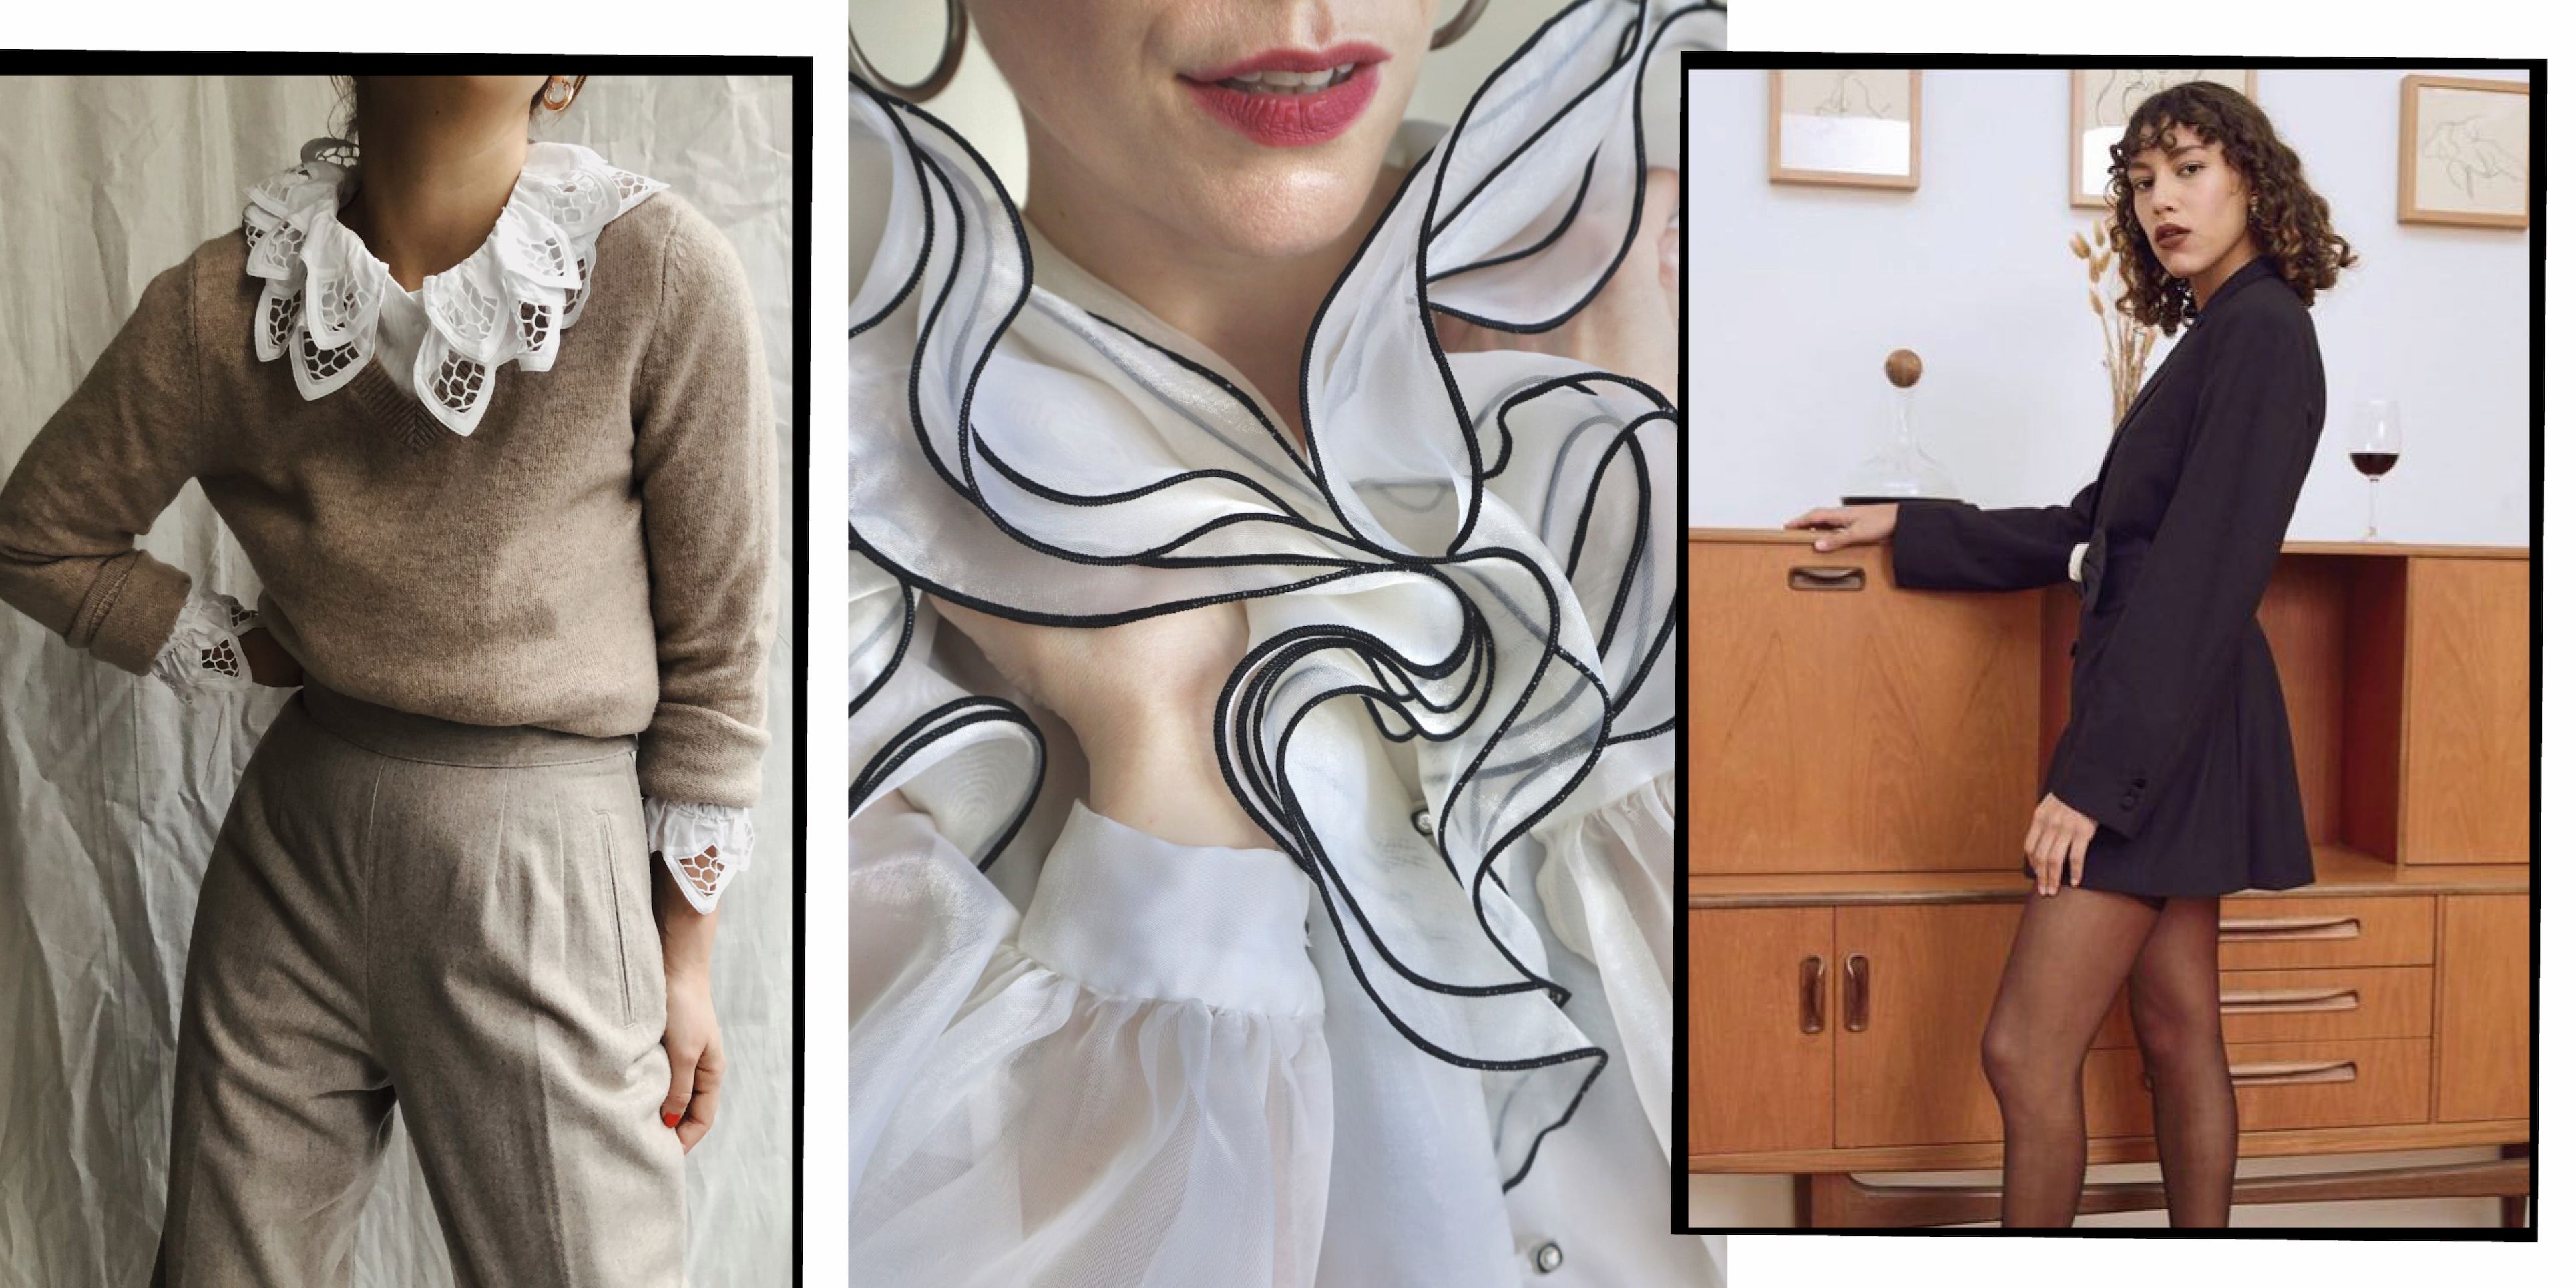 Vintage Couture-Inspired Women's Fashion and Style Blog: Vintage